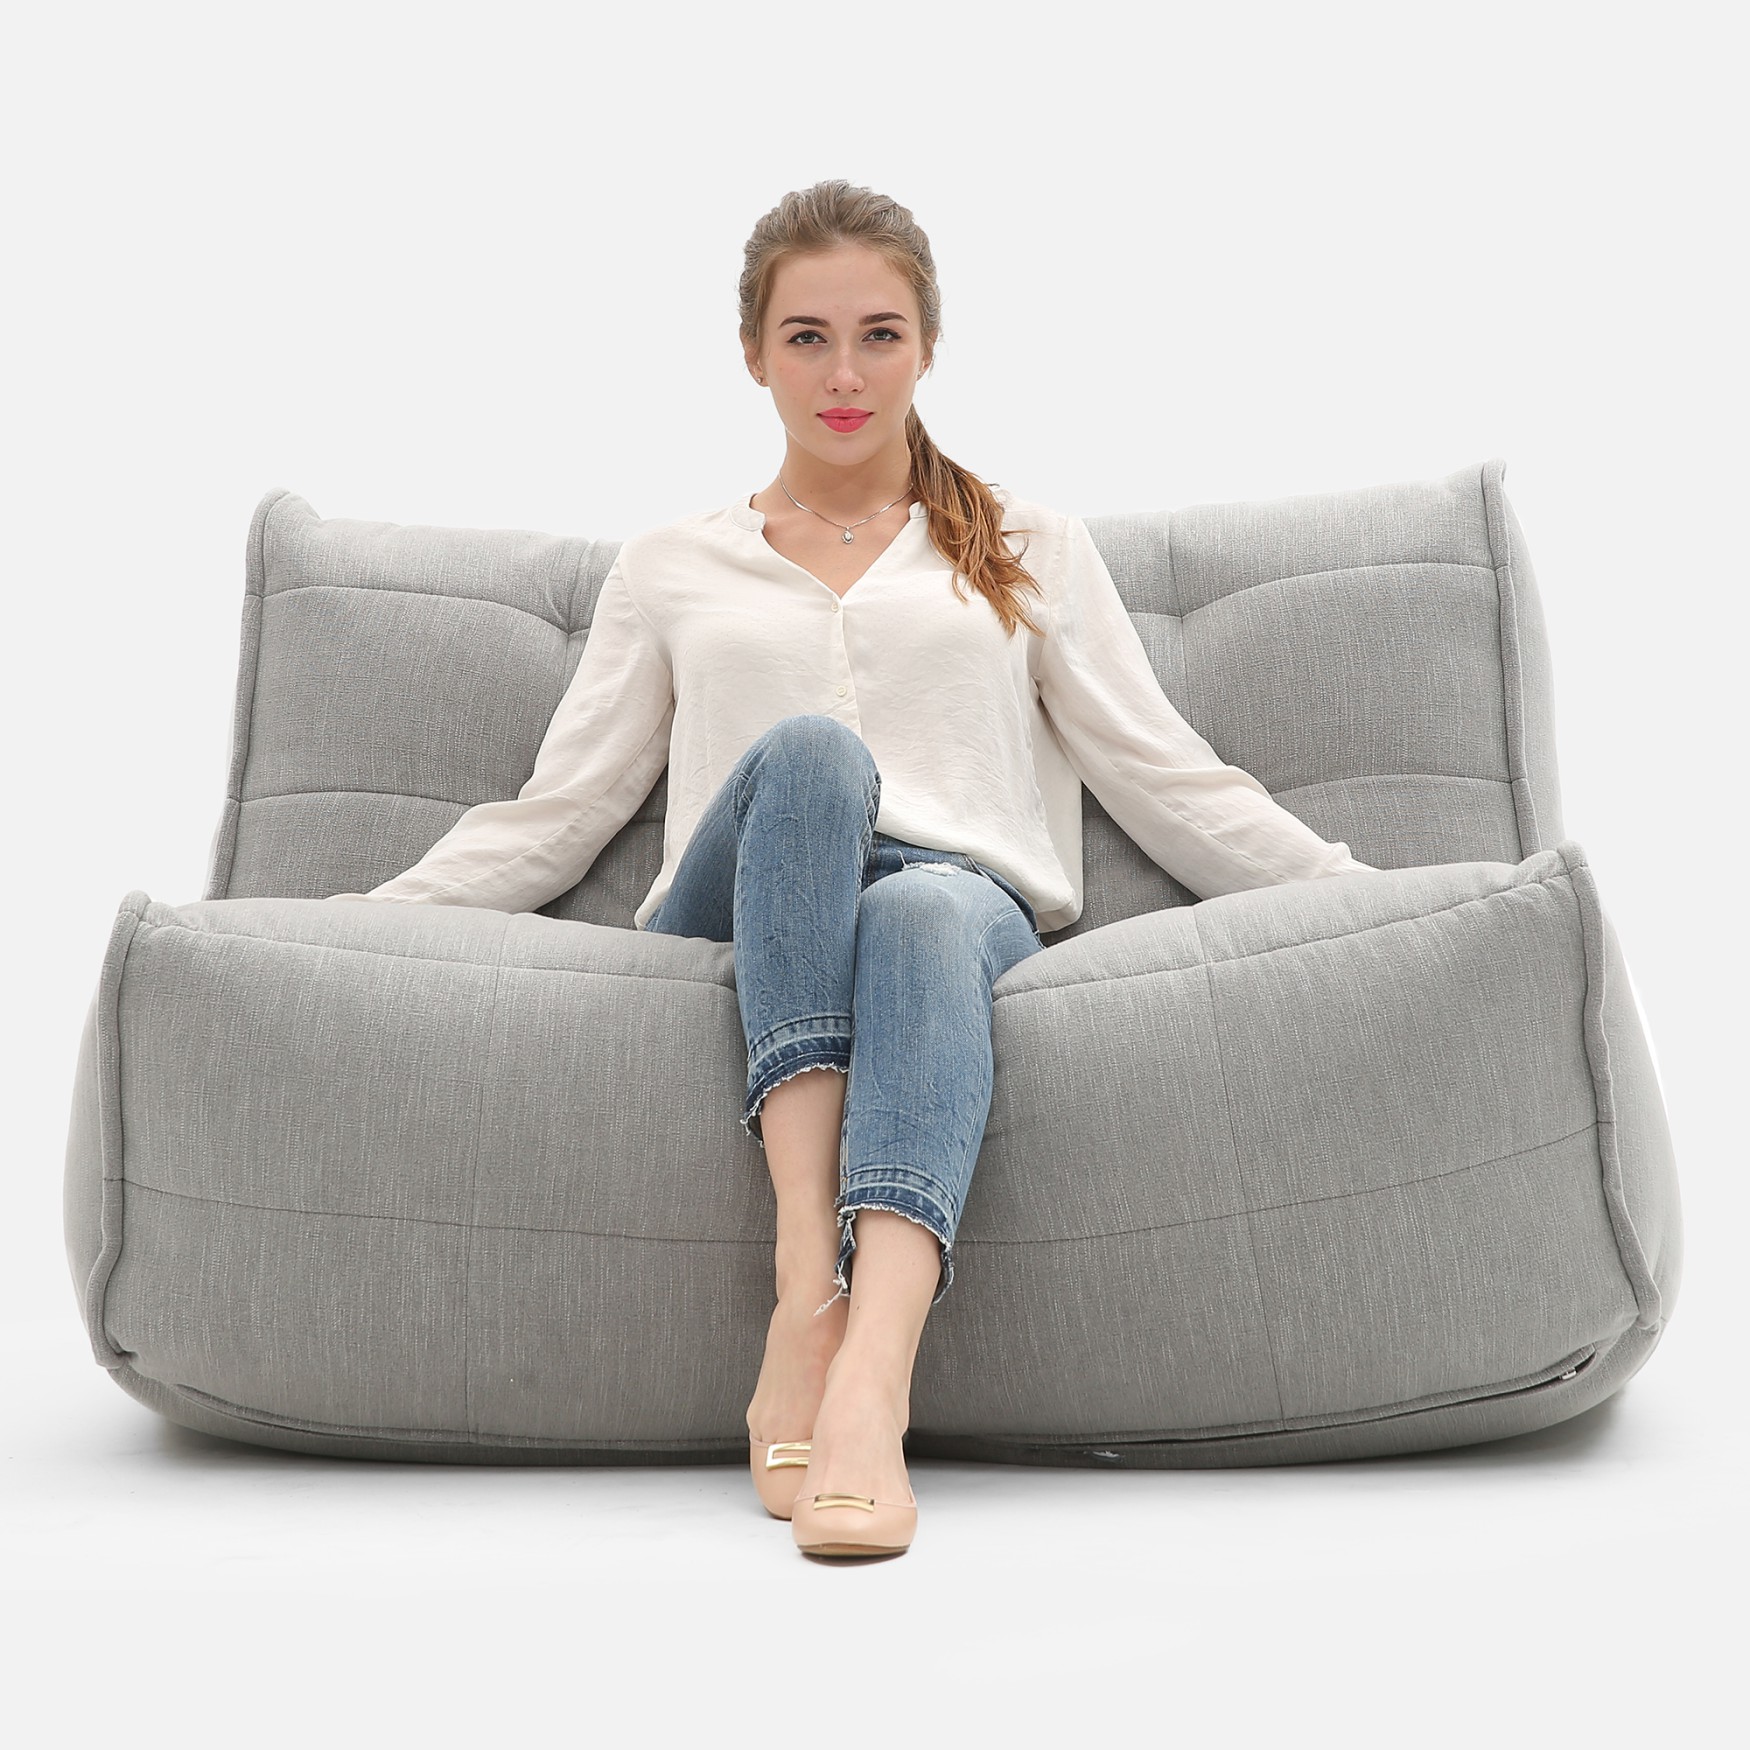 ambient lounge twin couch keystone grey